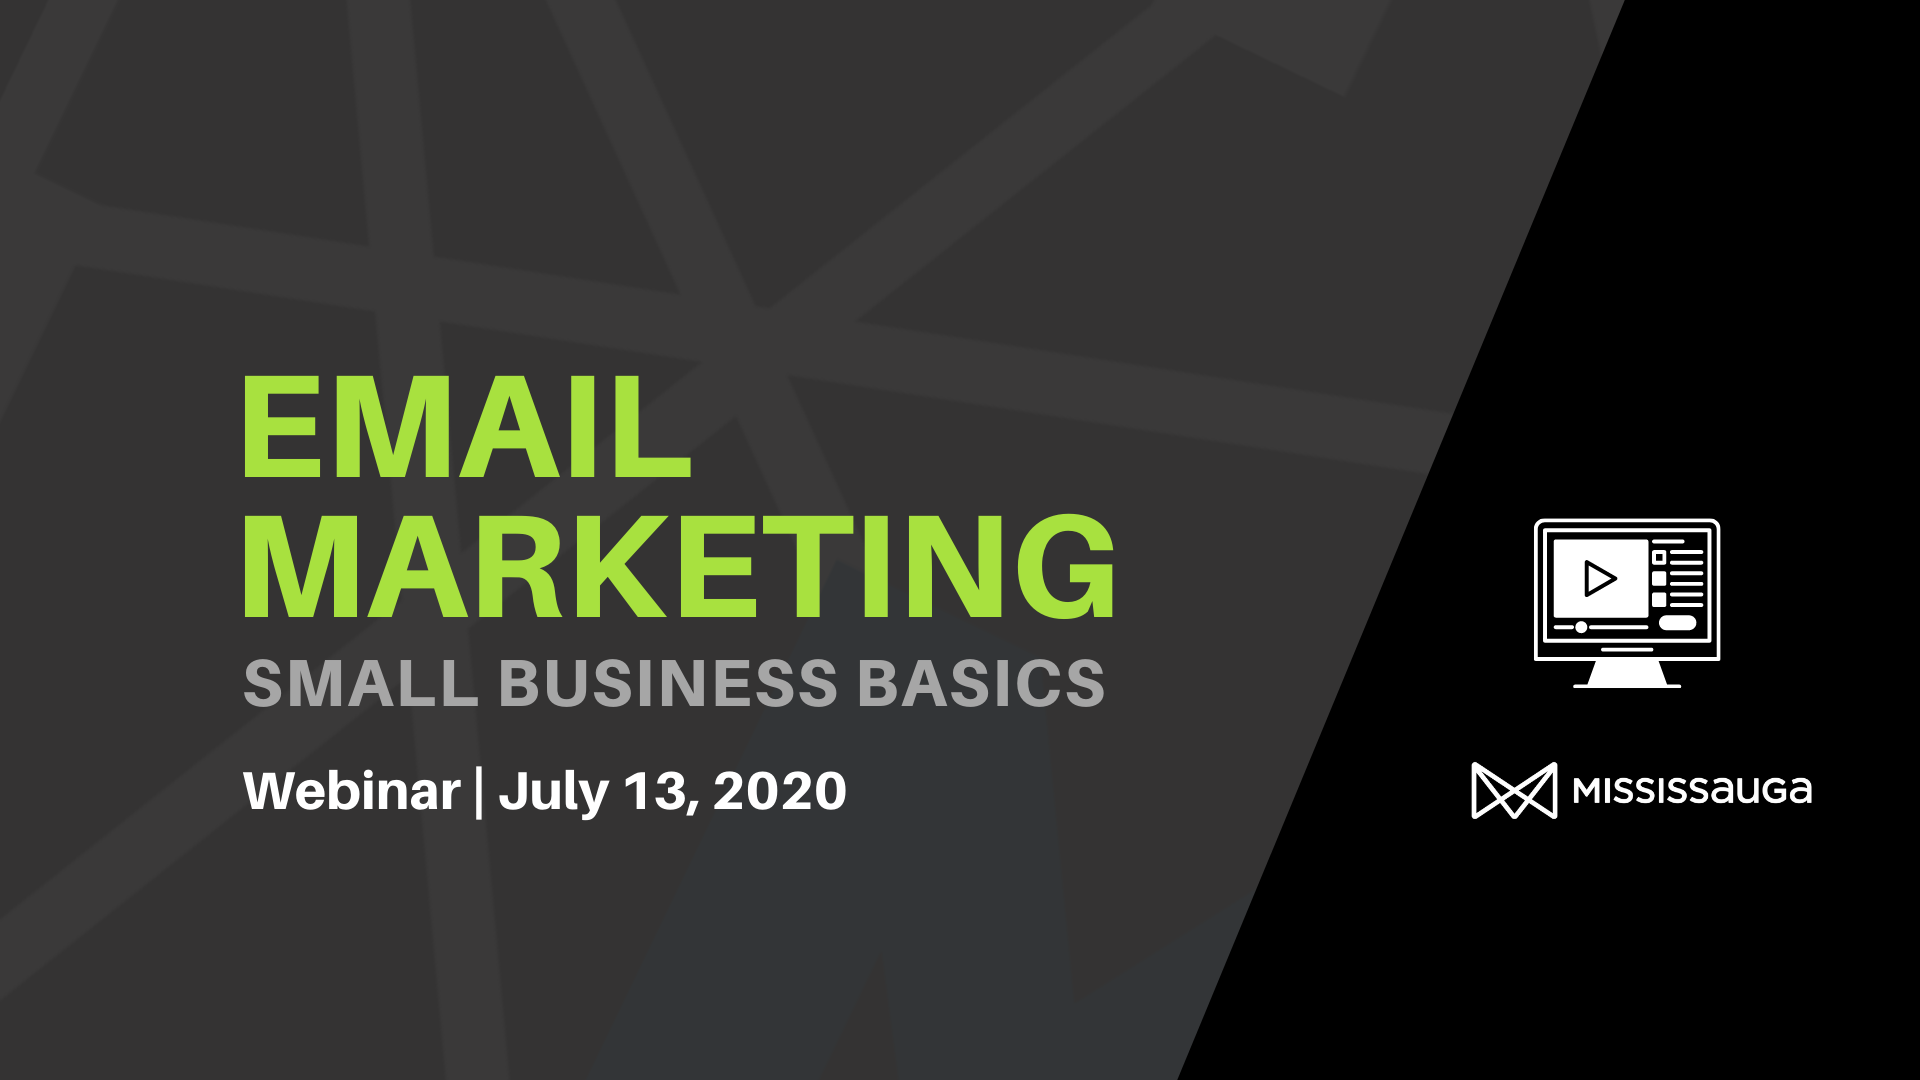 You are currently viewing Email Marketing 101 – Webinar, Jul 13